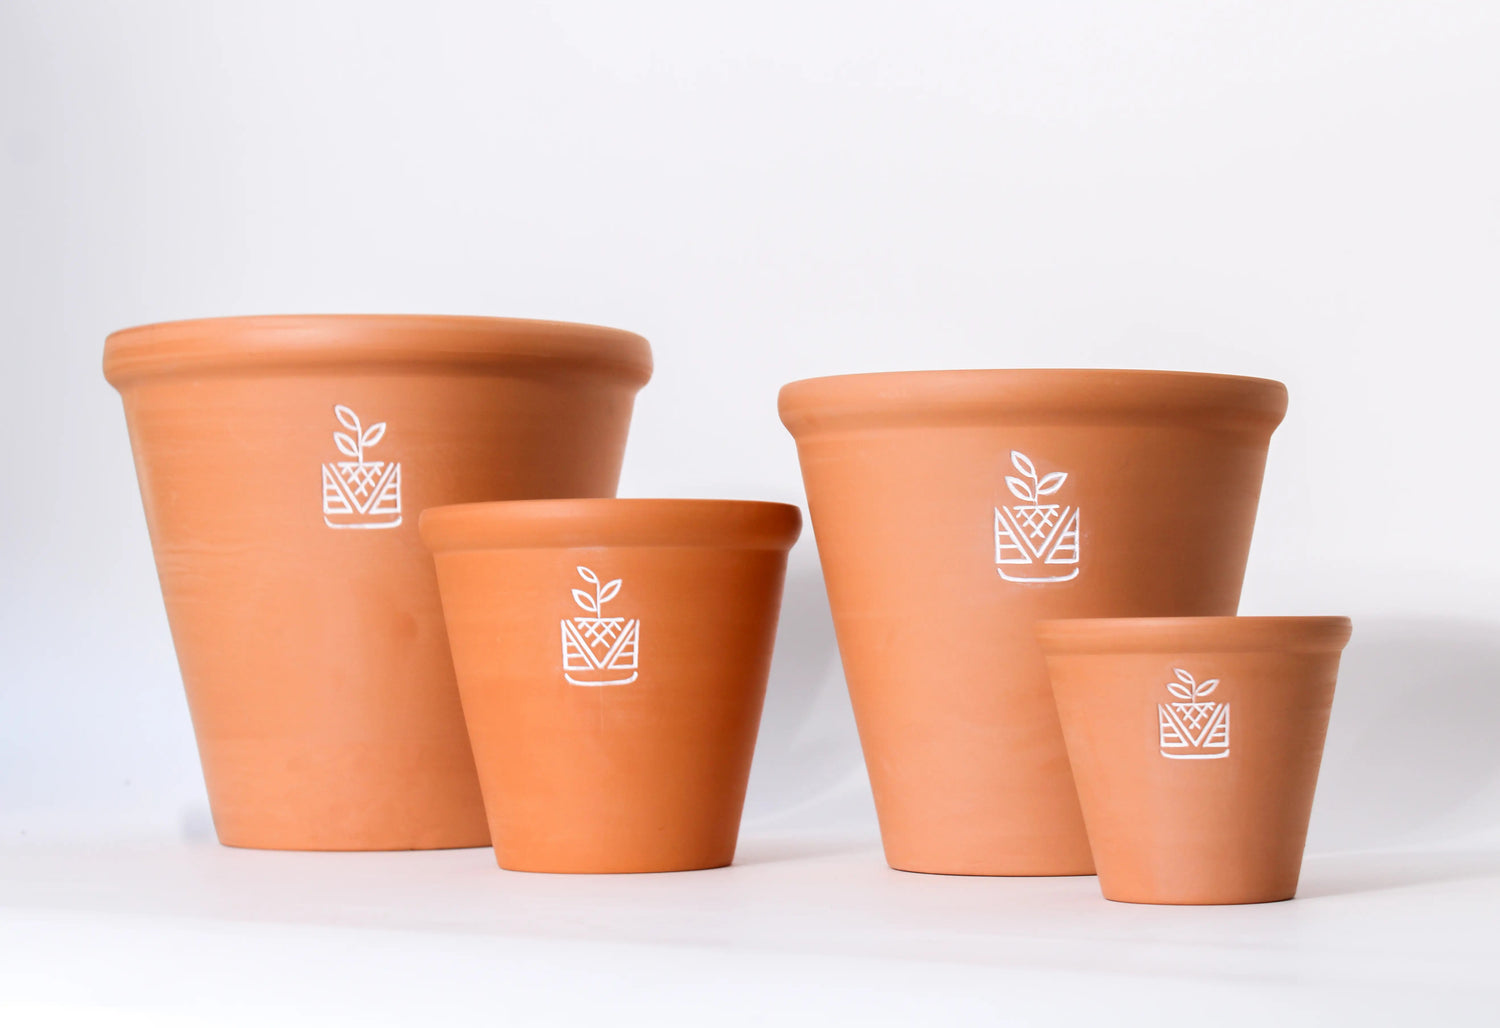 terra-cotta pots in all various sizes for live plants